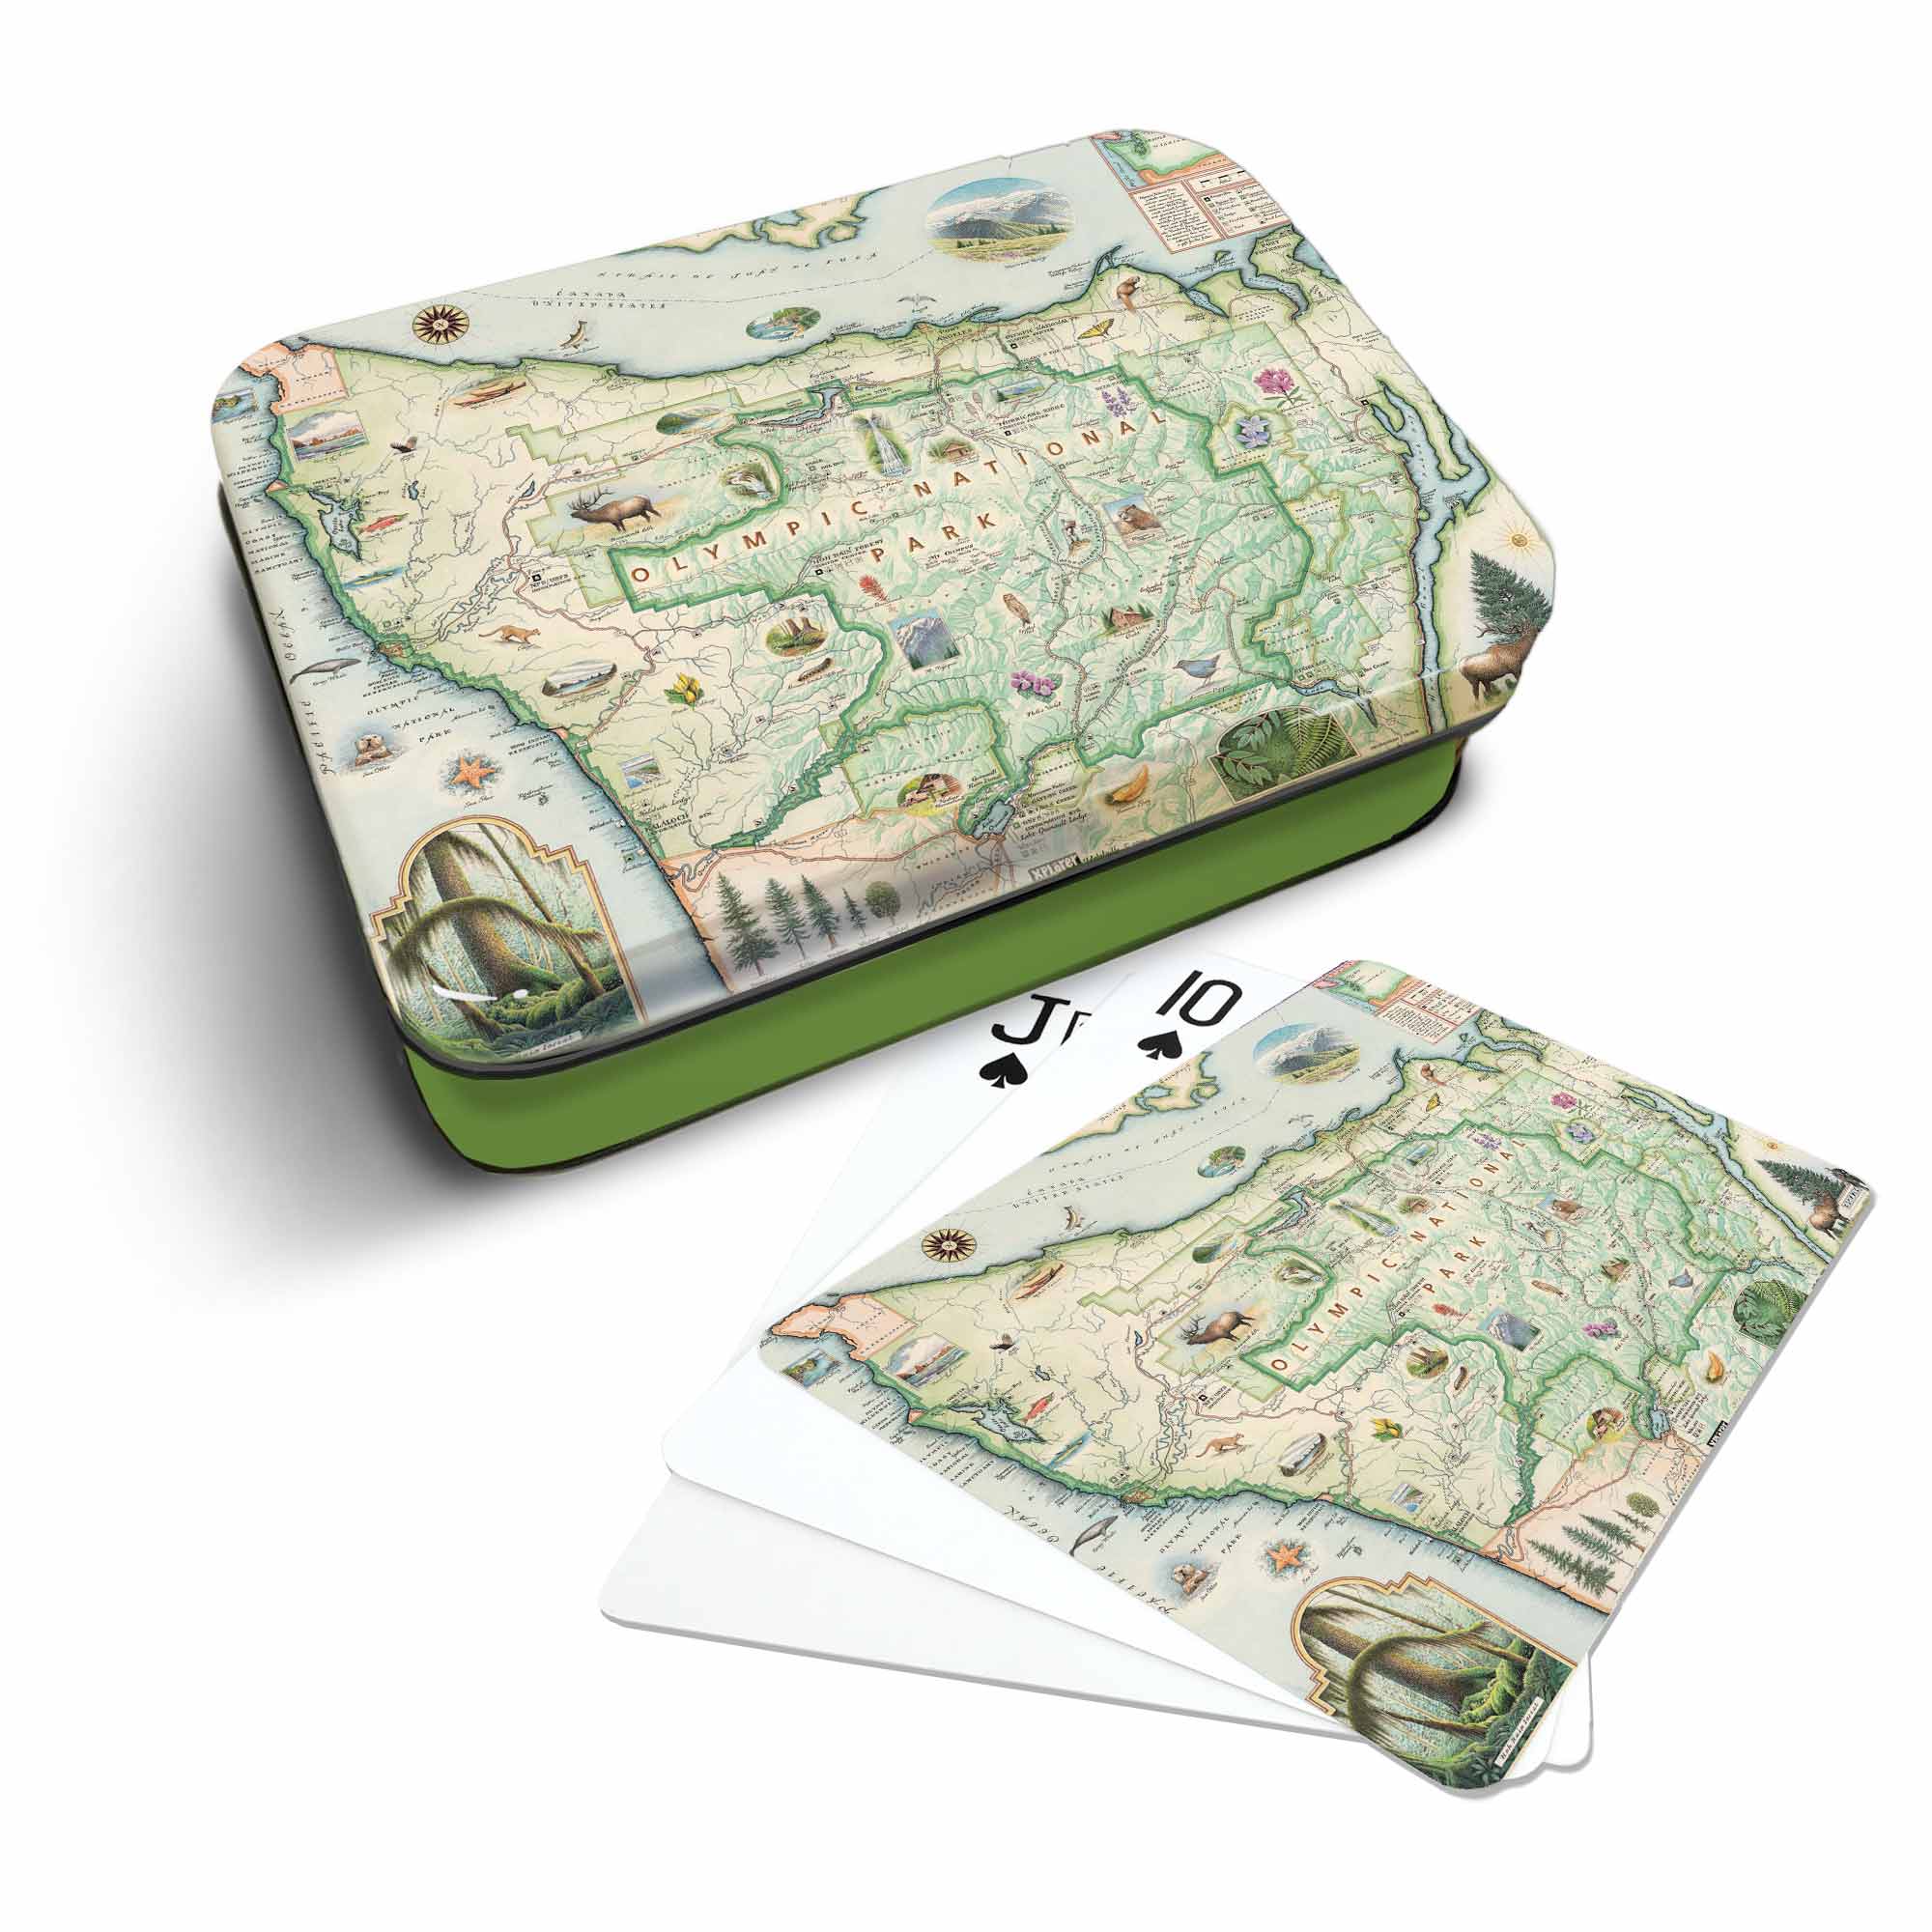 Olympic National Park Map Playing cards that features iconic attractions, flora and fauna of that area - Green Metal Tin